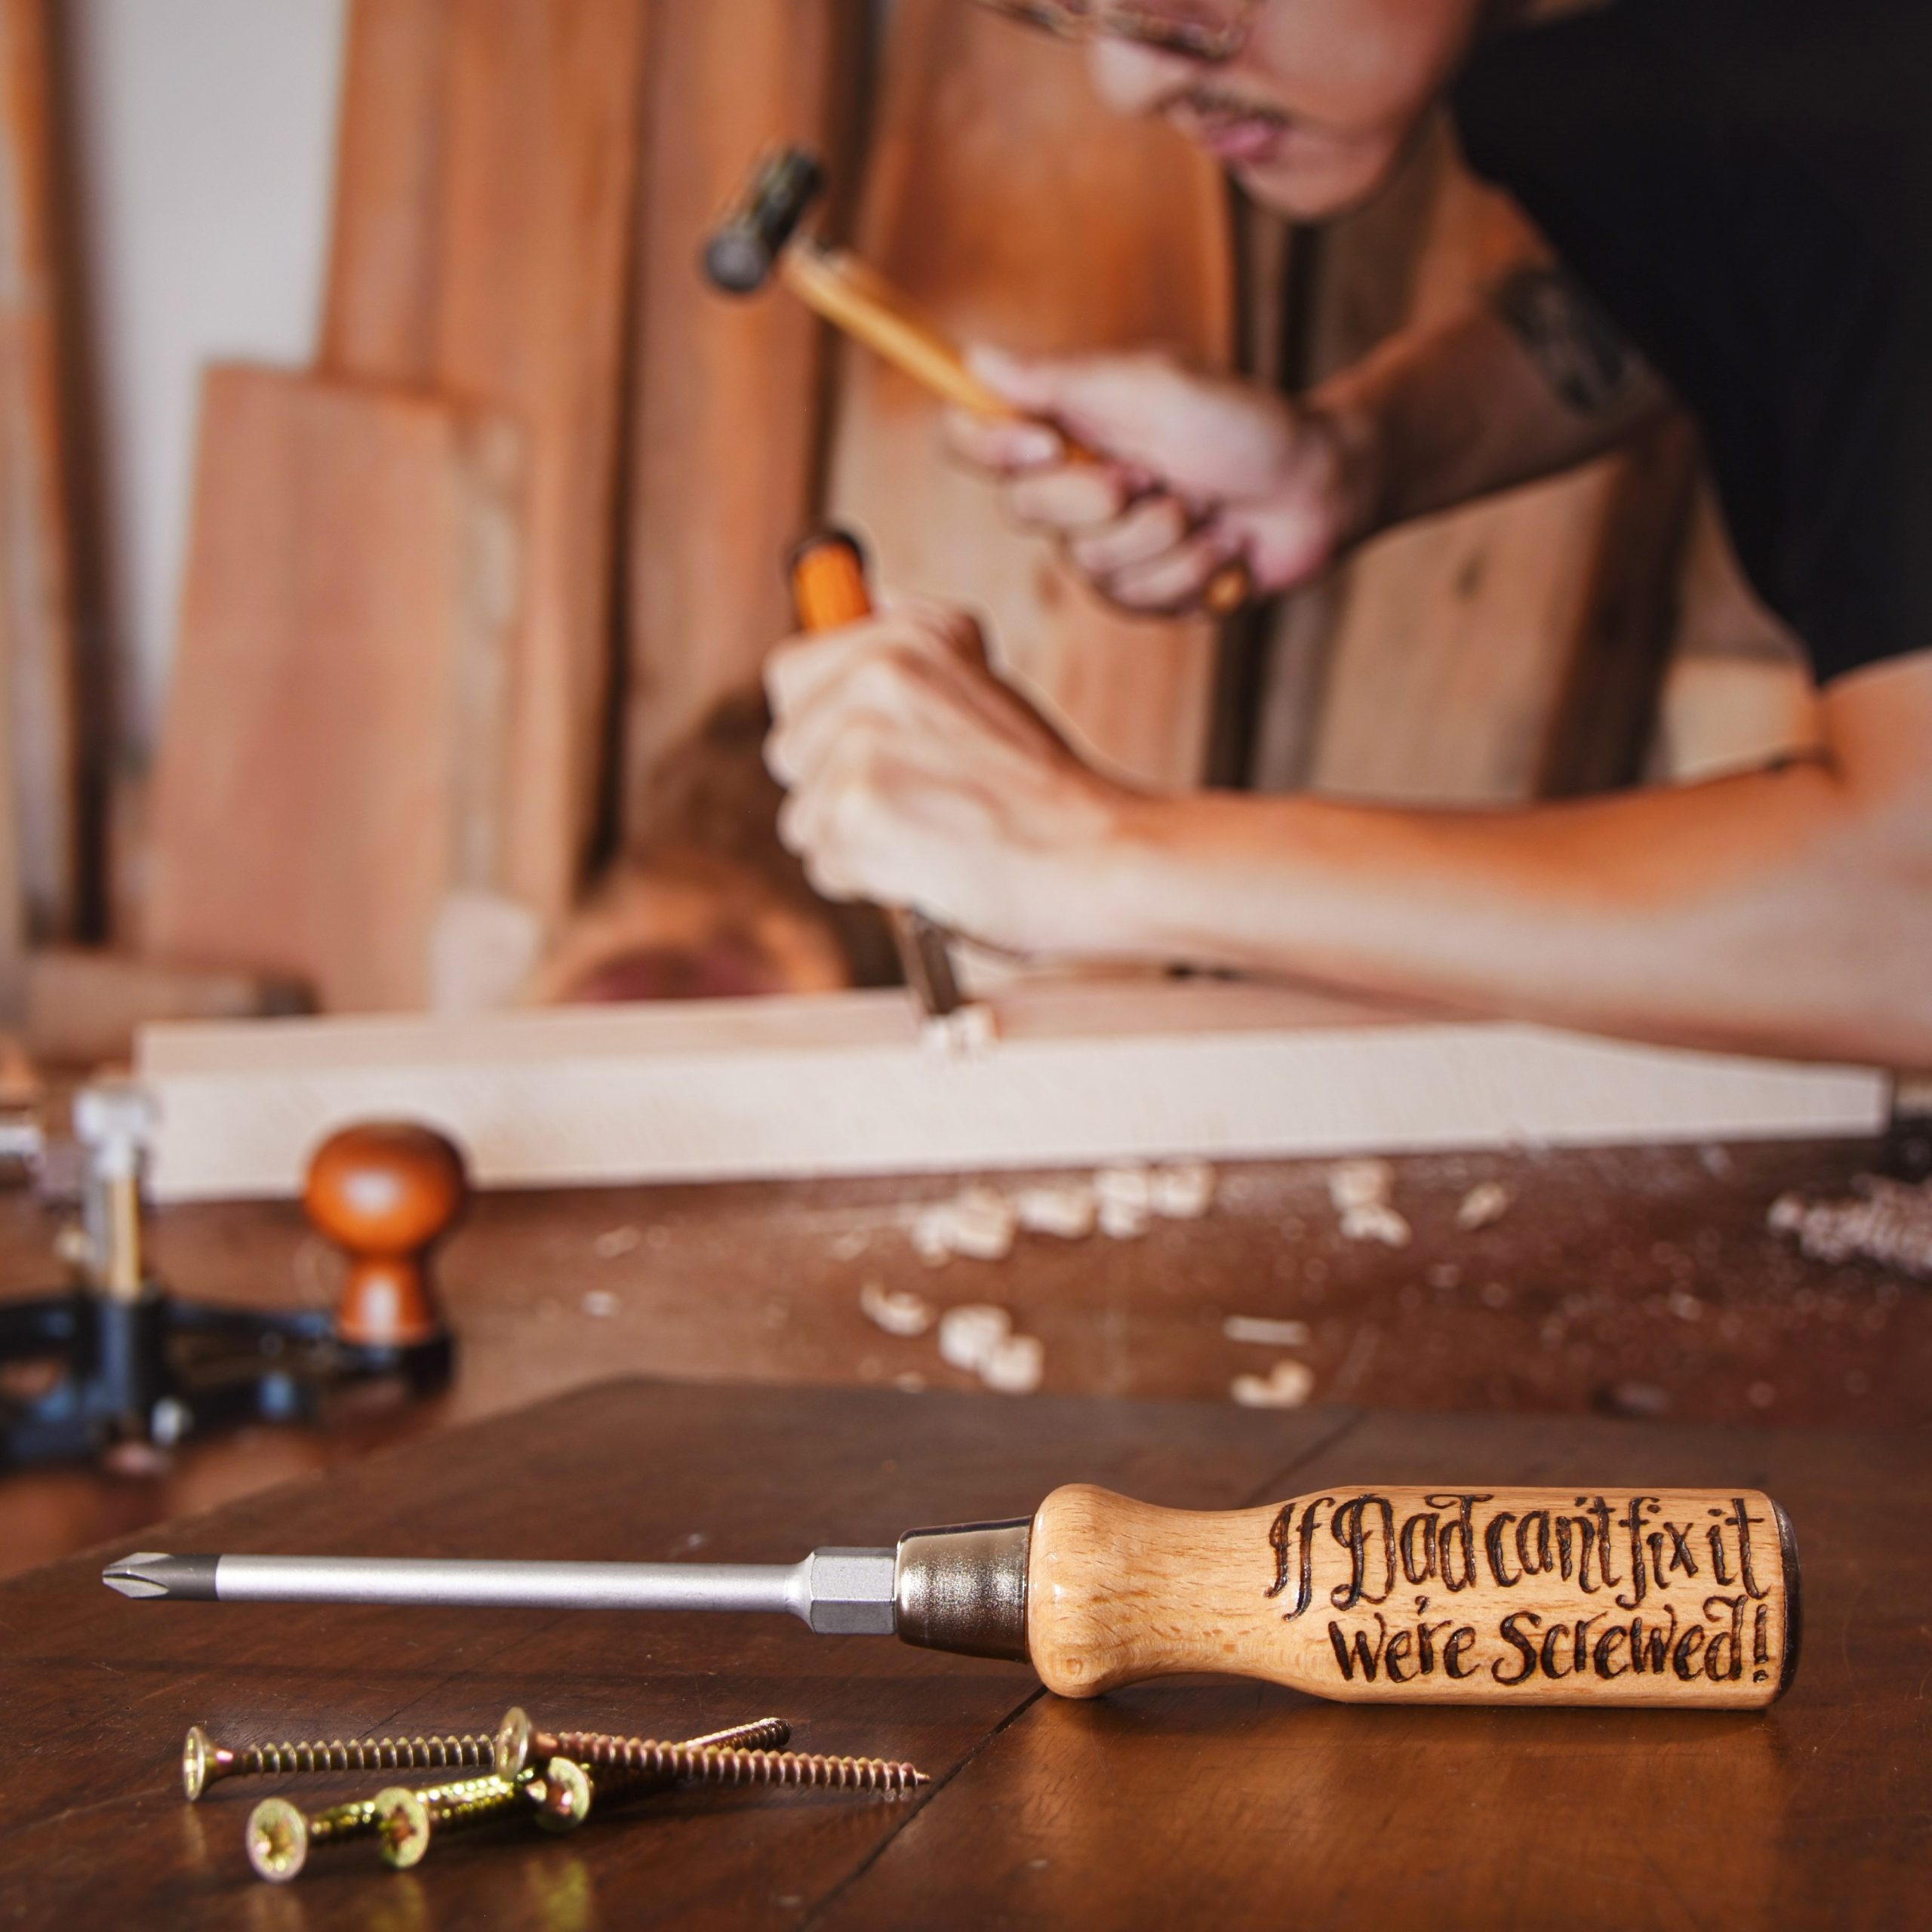 "If Dad can't fix it we're screwed!" personalised screwdriver for Father's Day hand engraved - £24.73